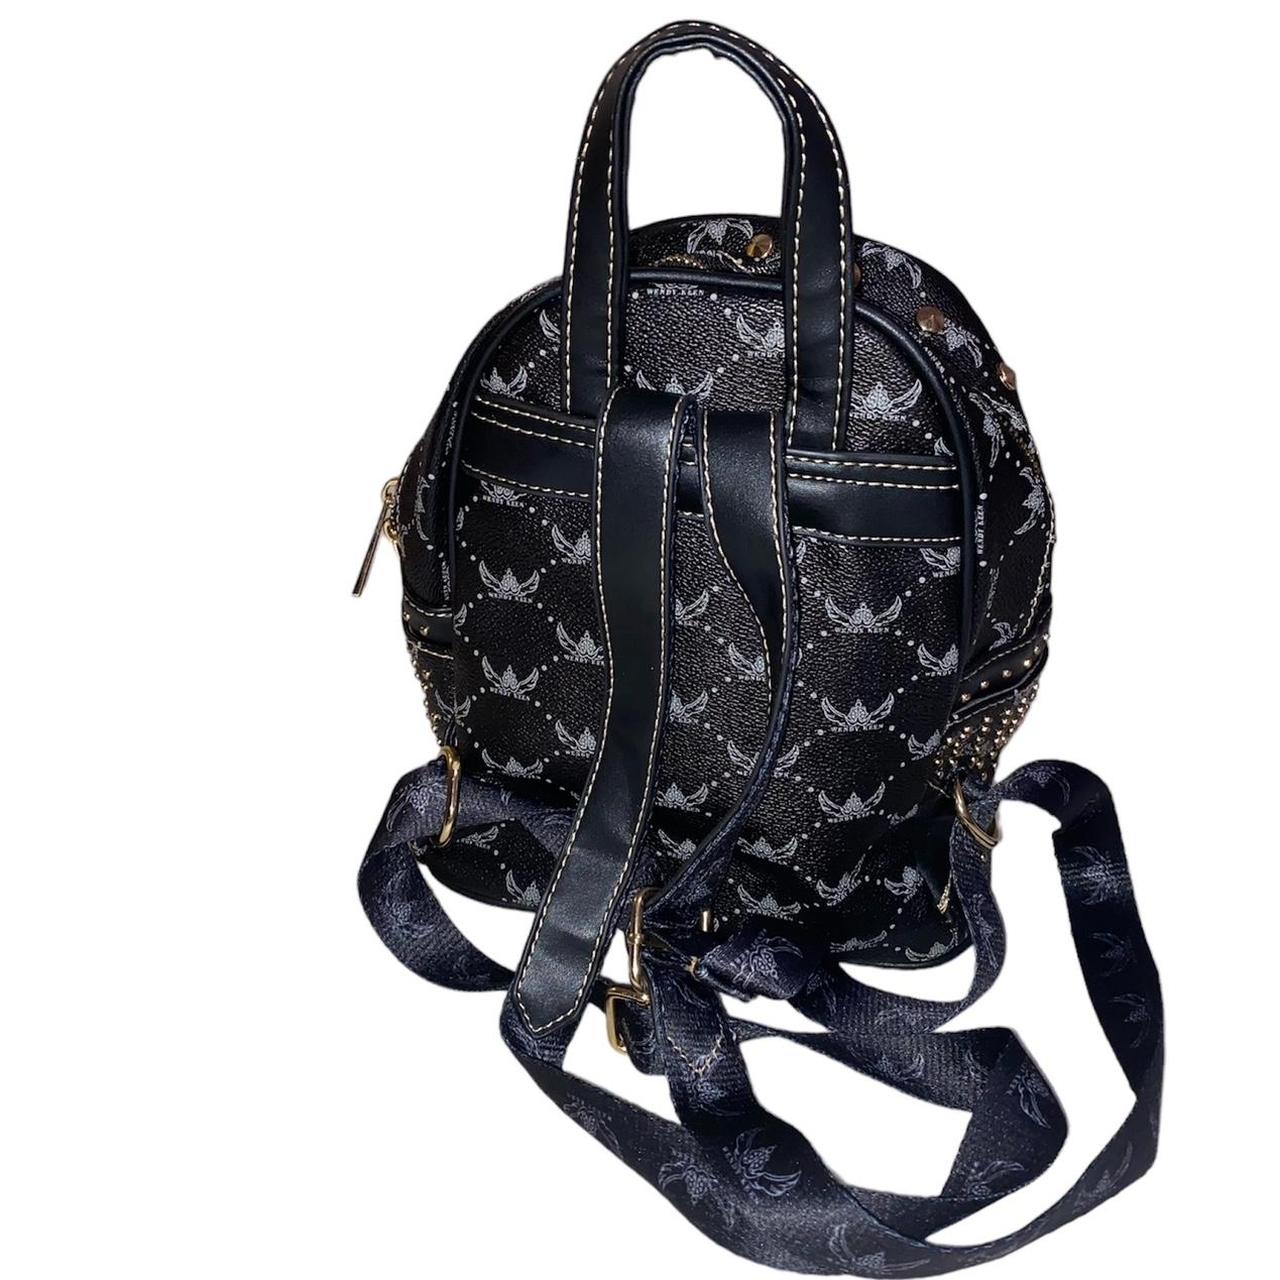 Wendy Keen Leather Mini Backpack | Groupon Goods